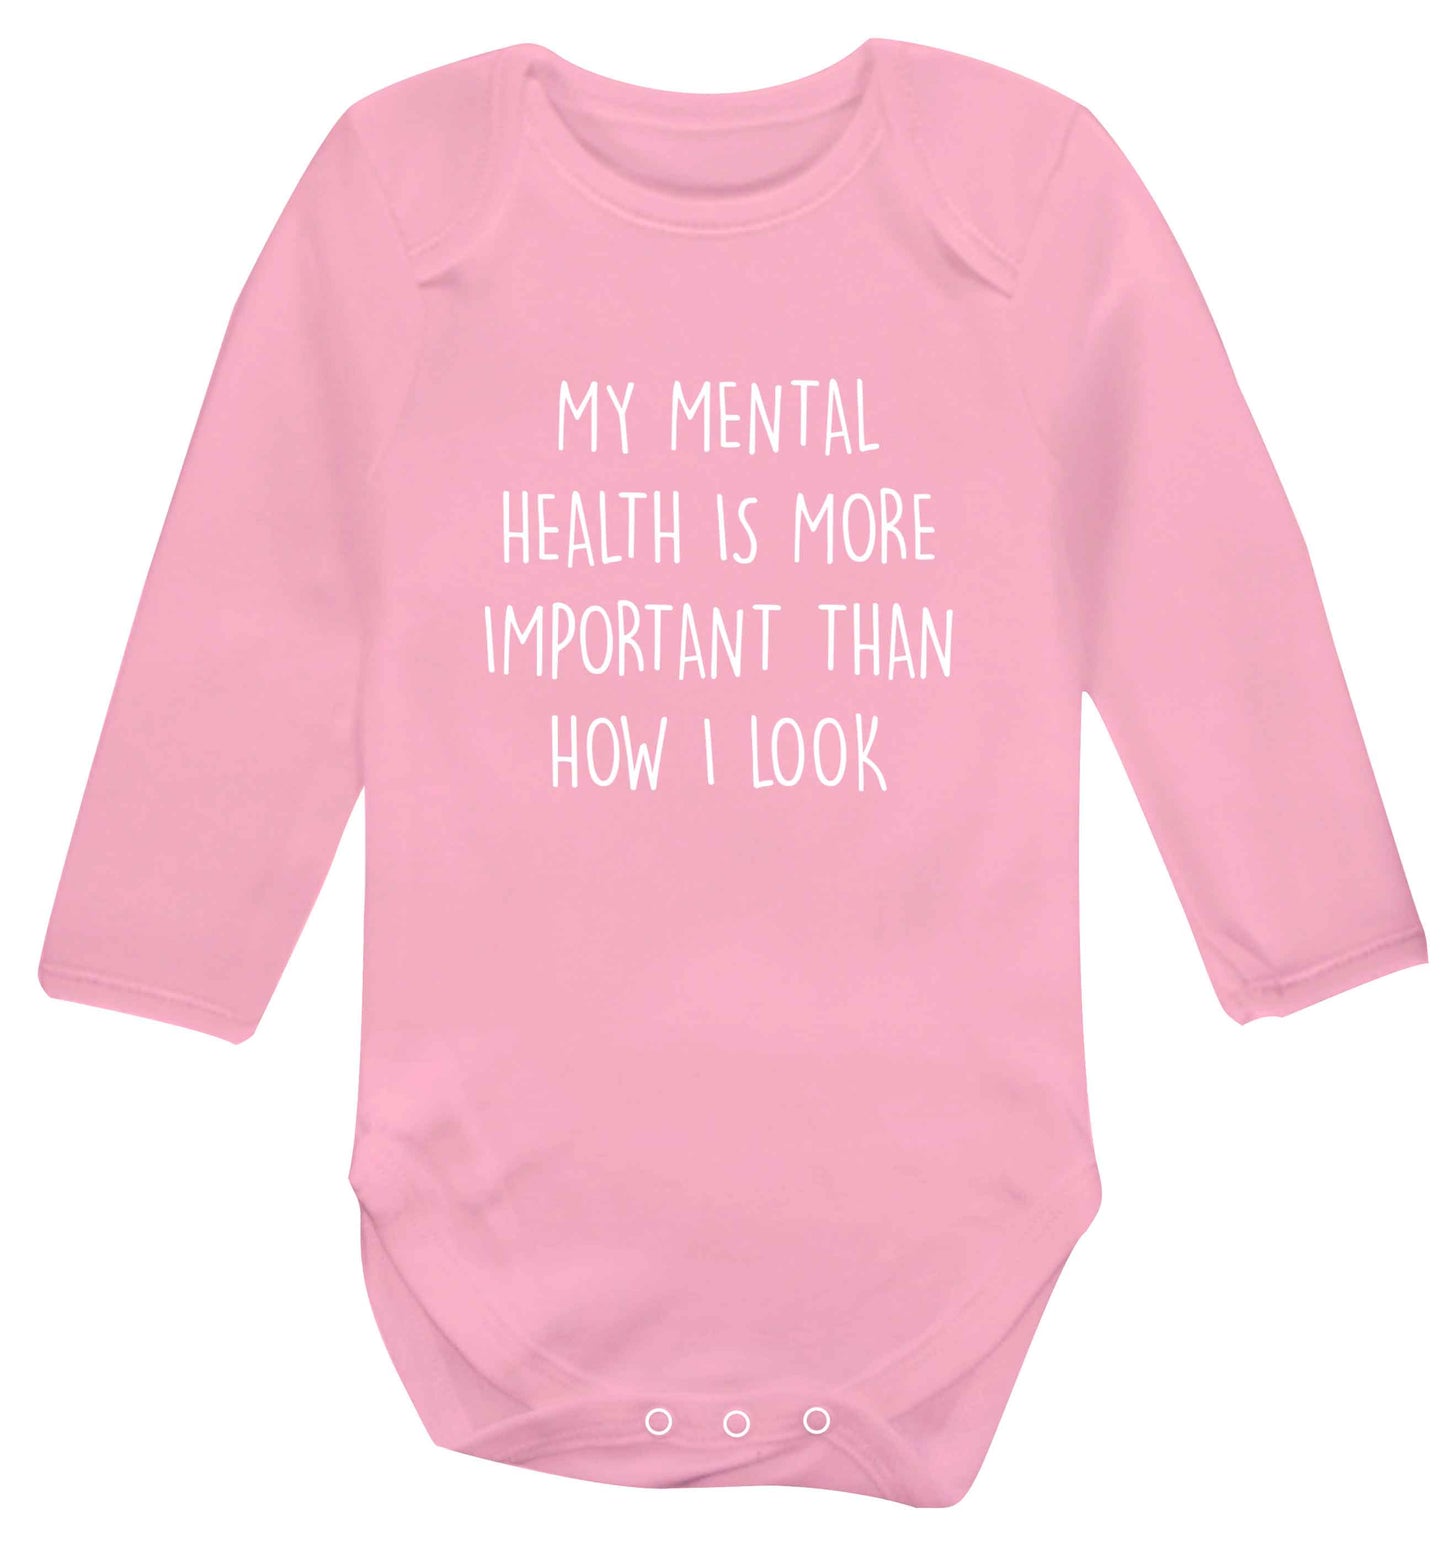 My mental health is more importnat than how I look baby vest long sleeved pale pink 6-12 months